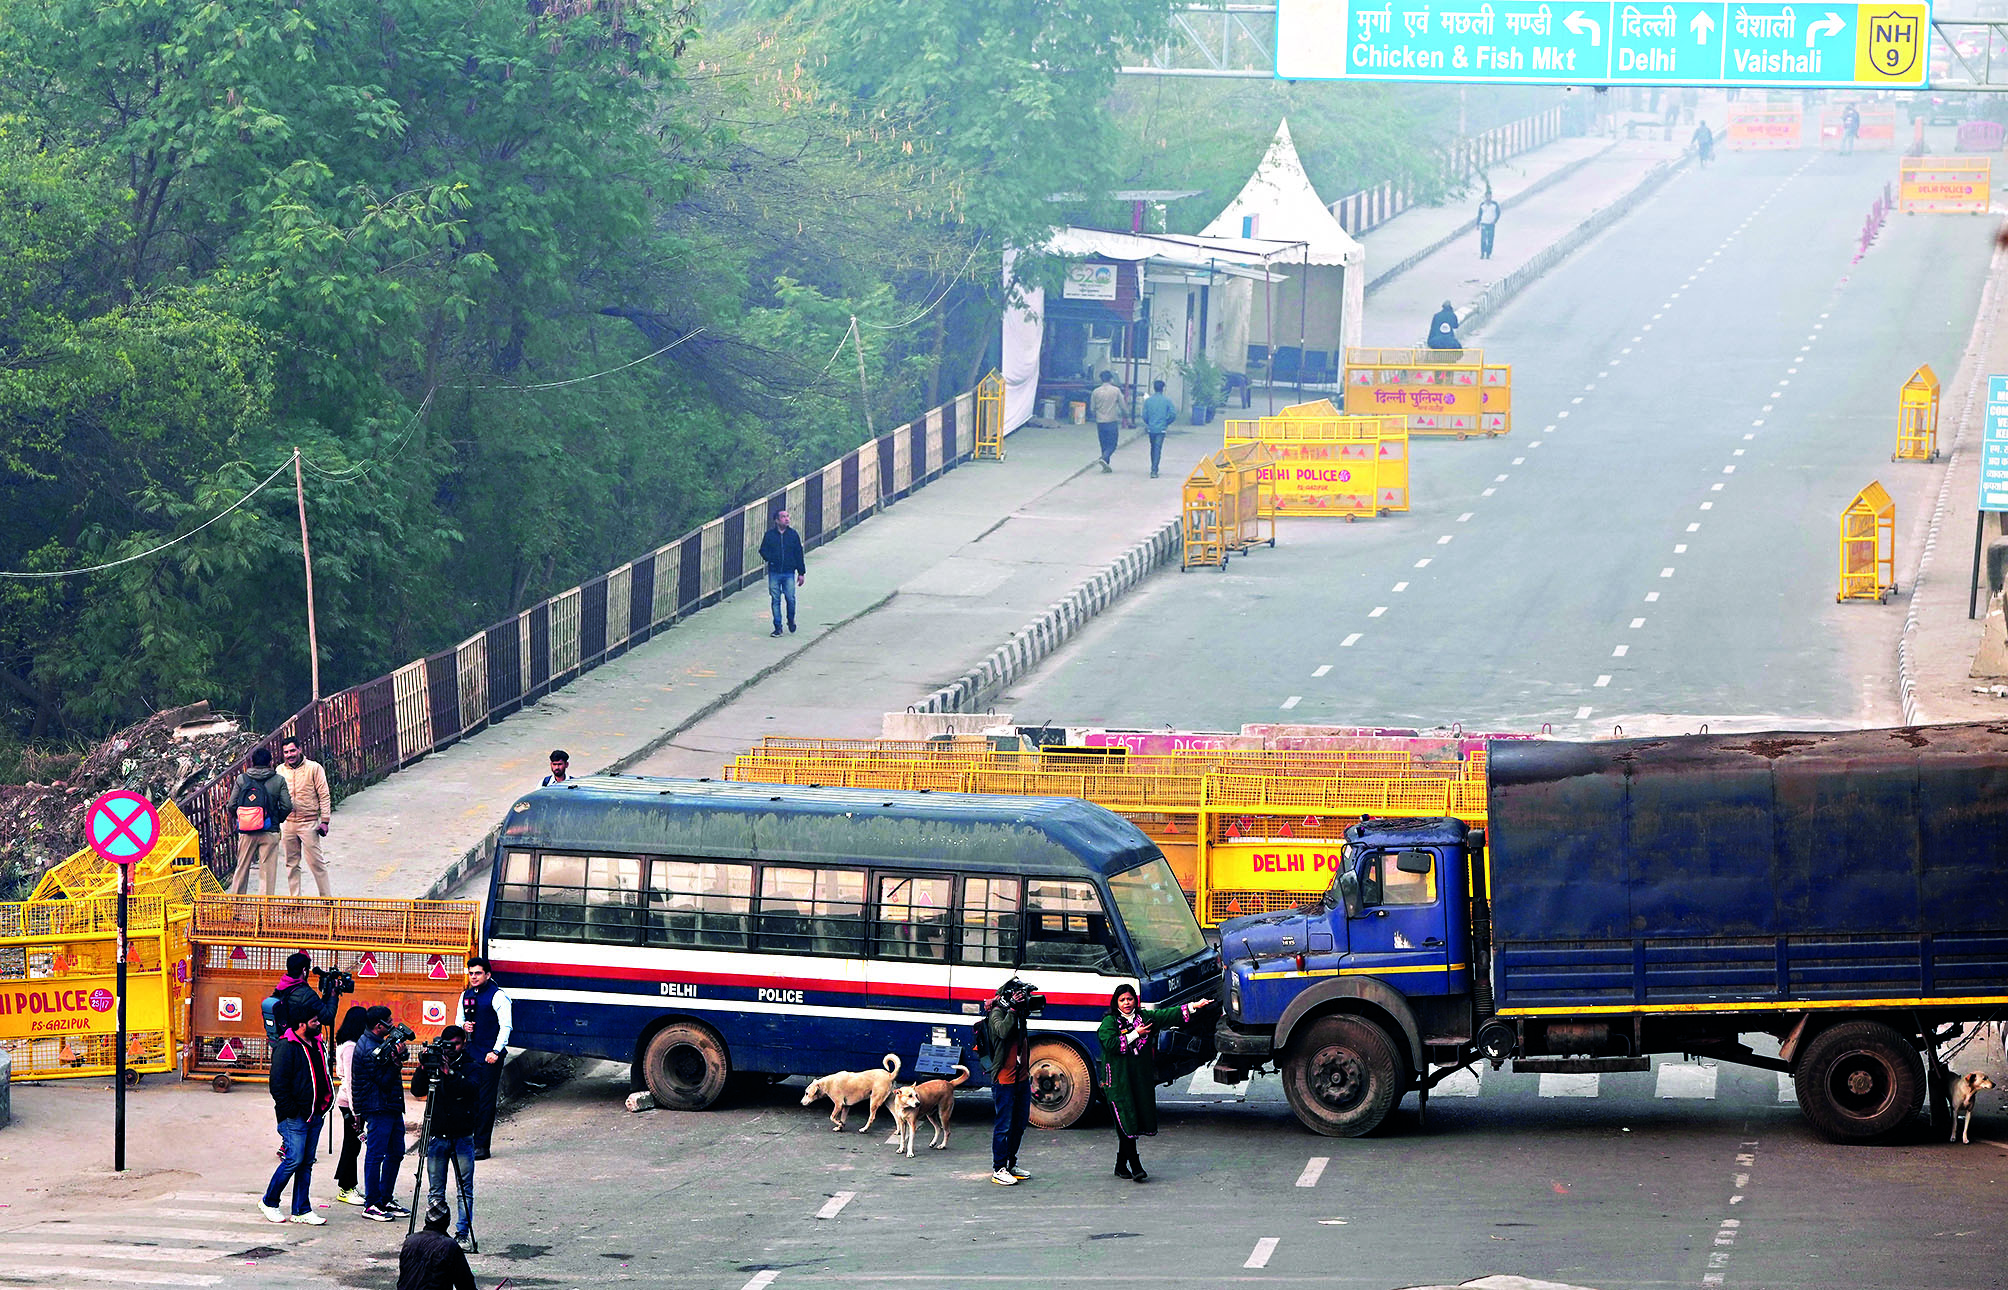 Traffic restrictions in place at Delhi borders, security beefed up